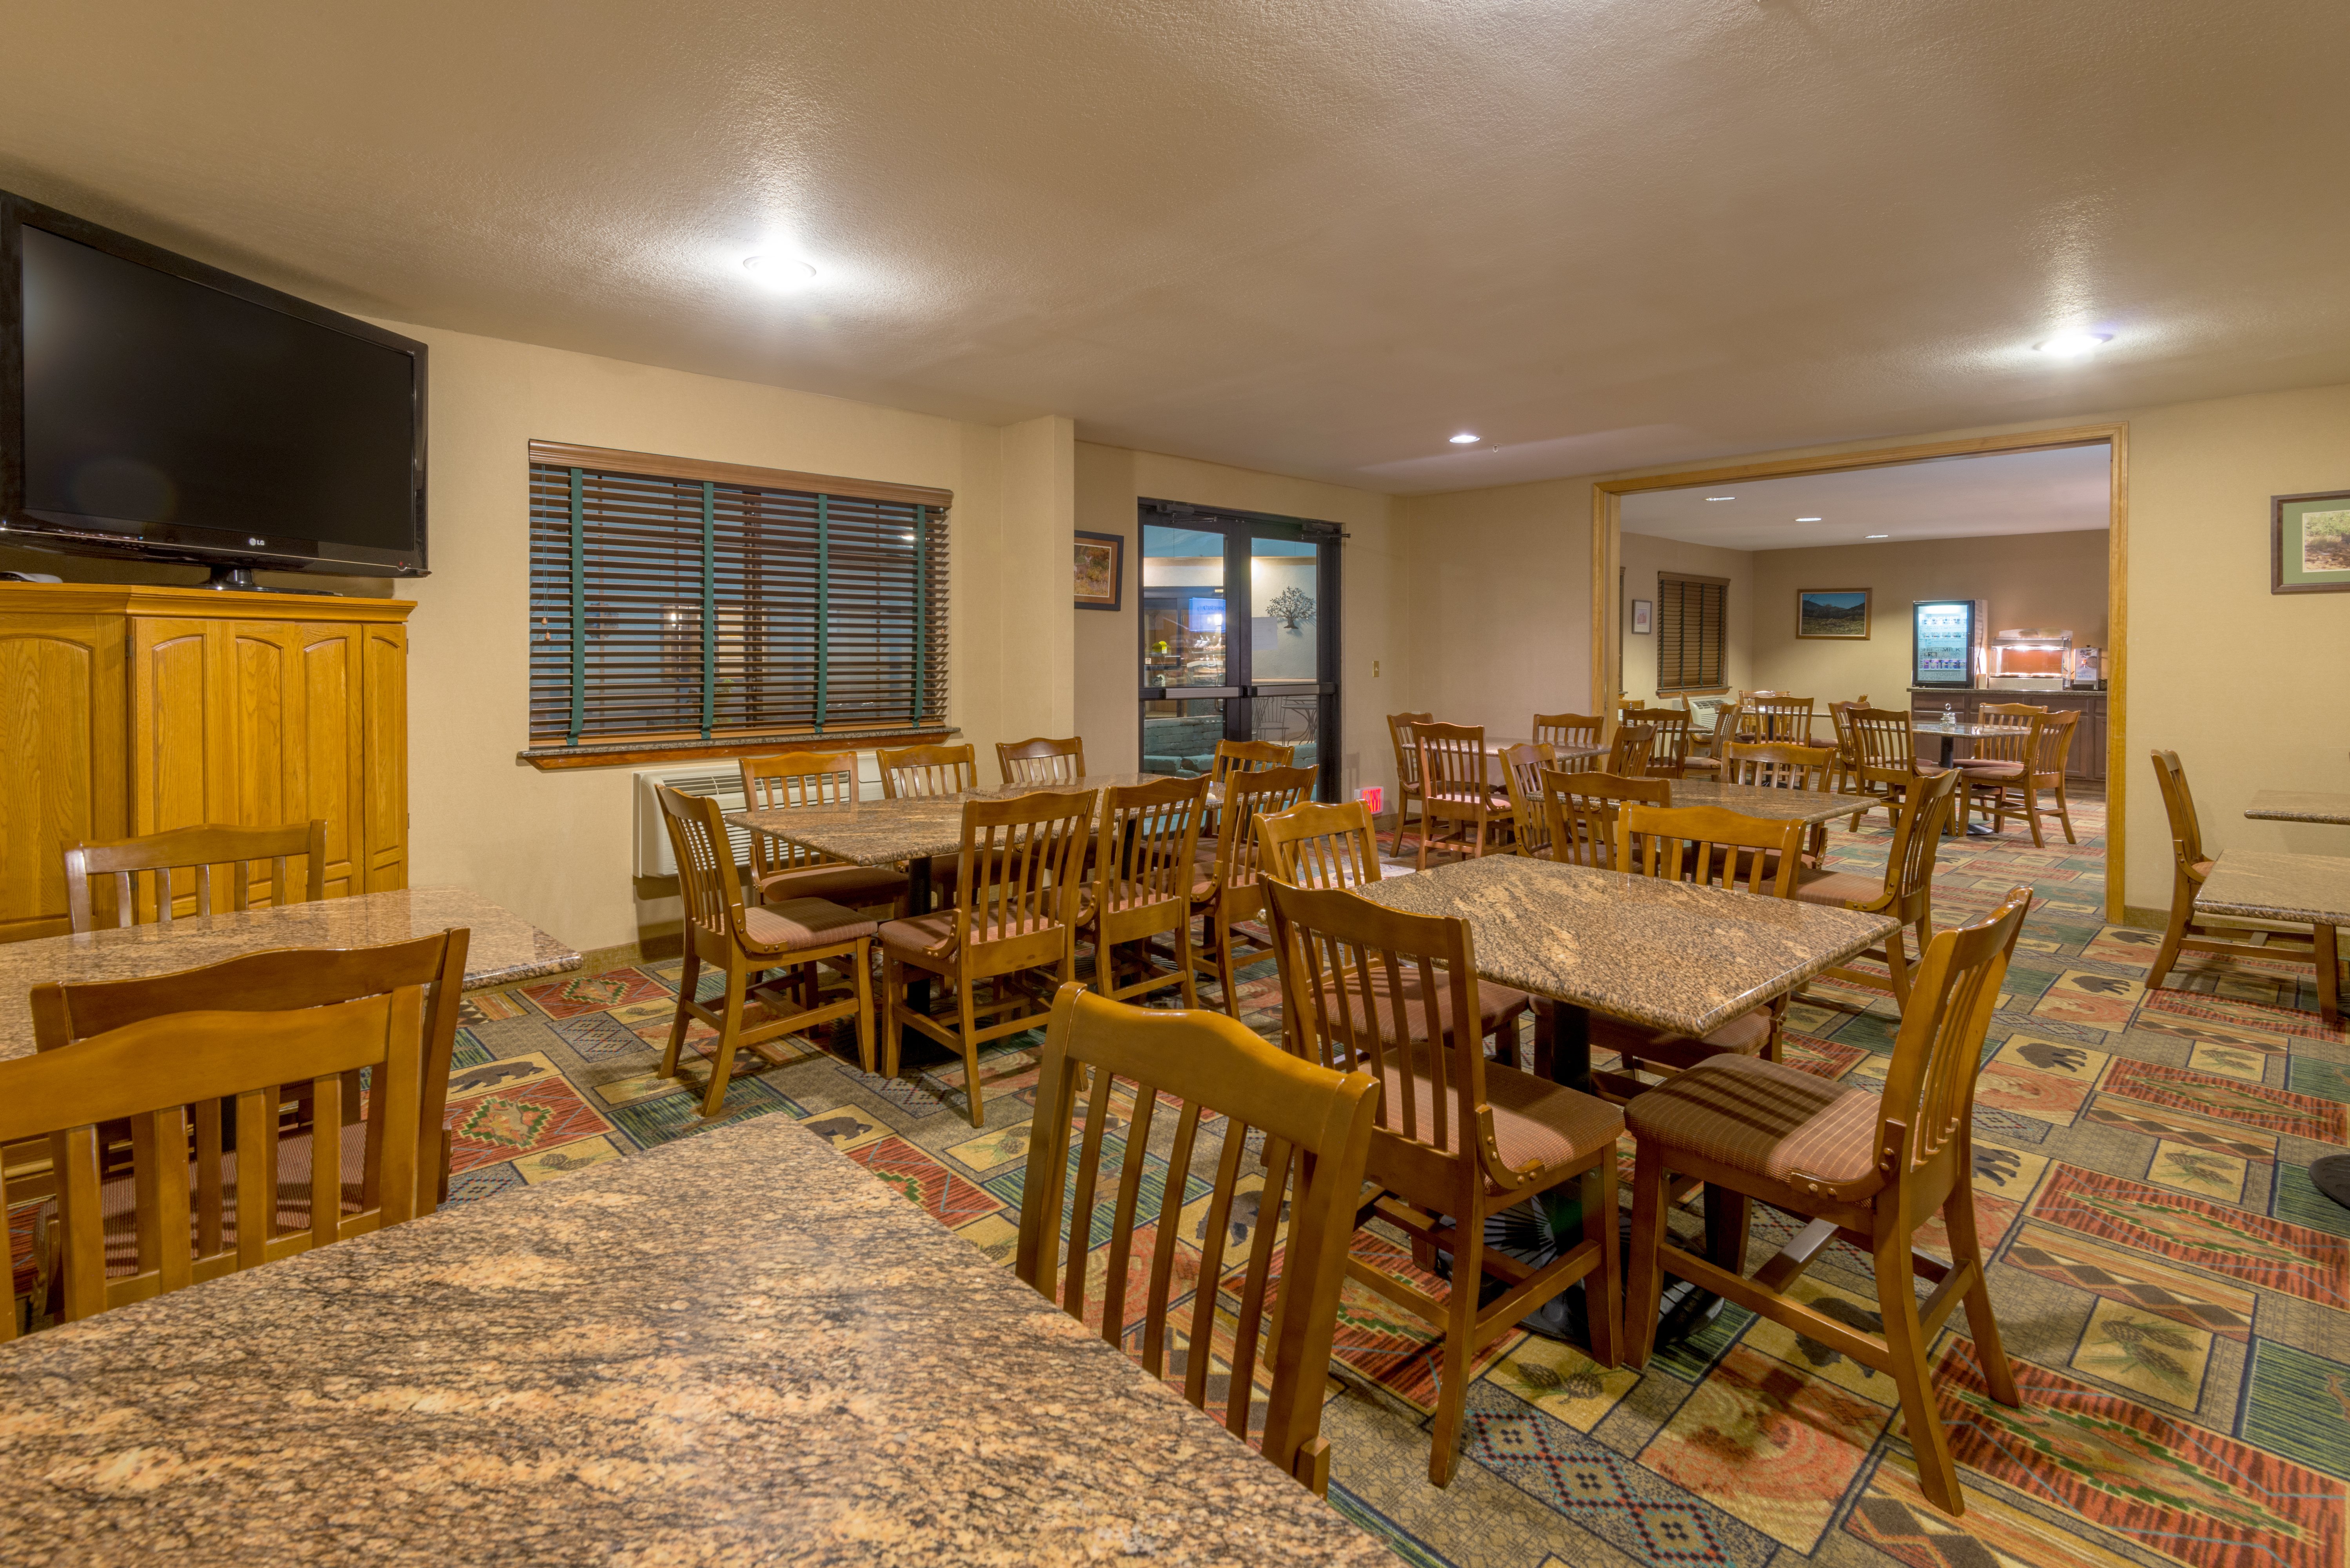 Our Breakfast Area provides ample seating in Raton NM